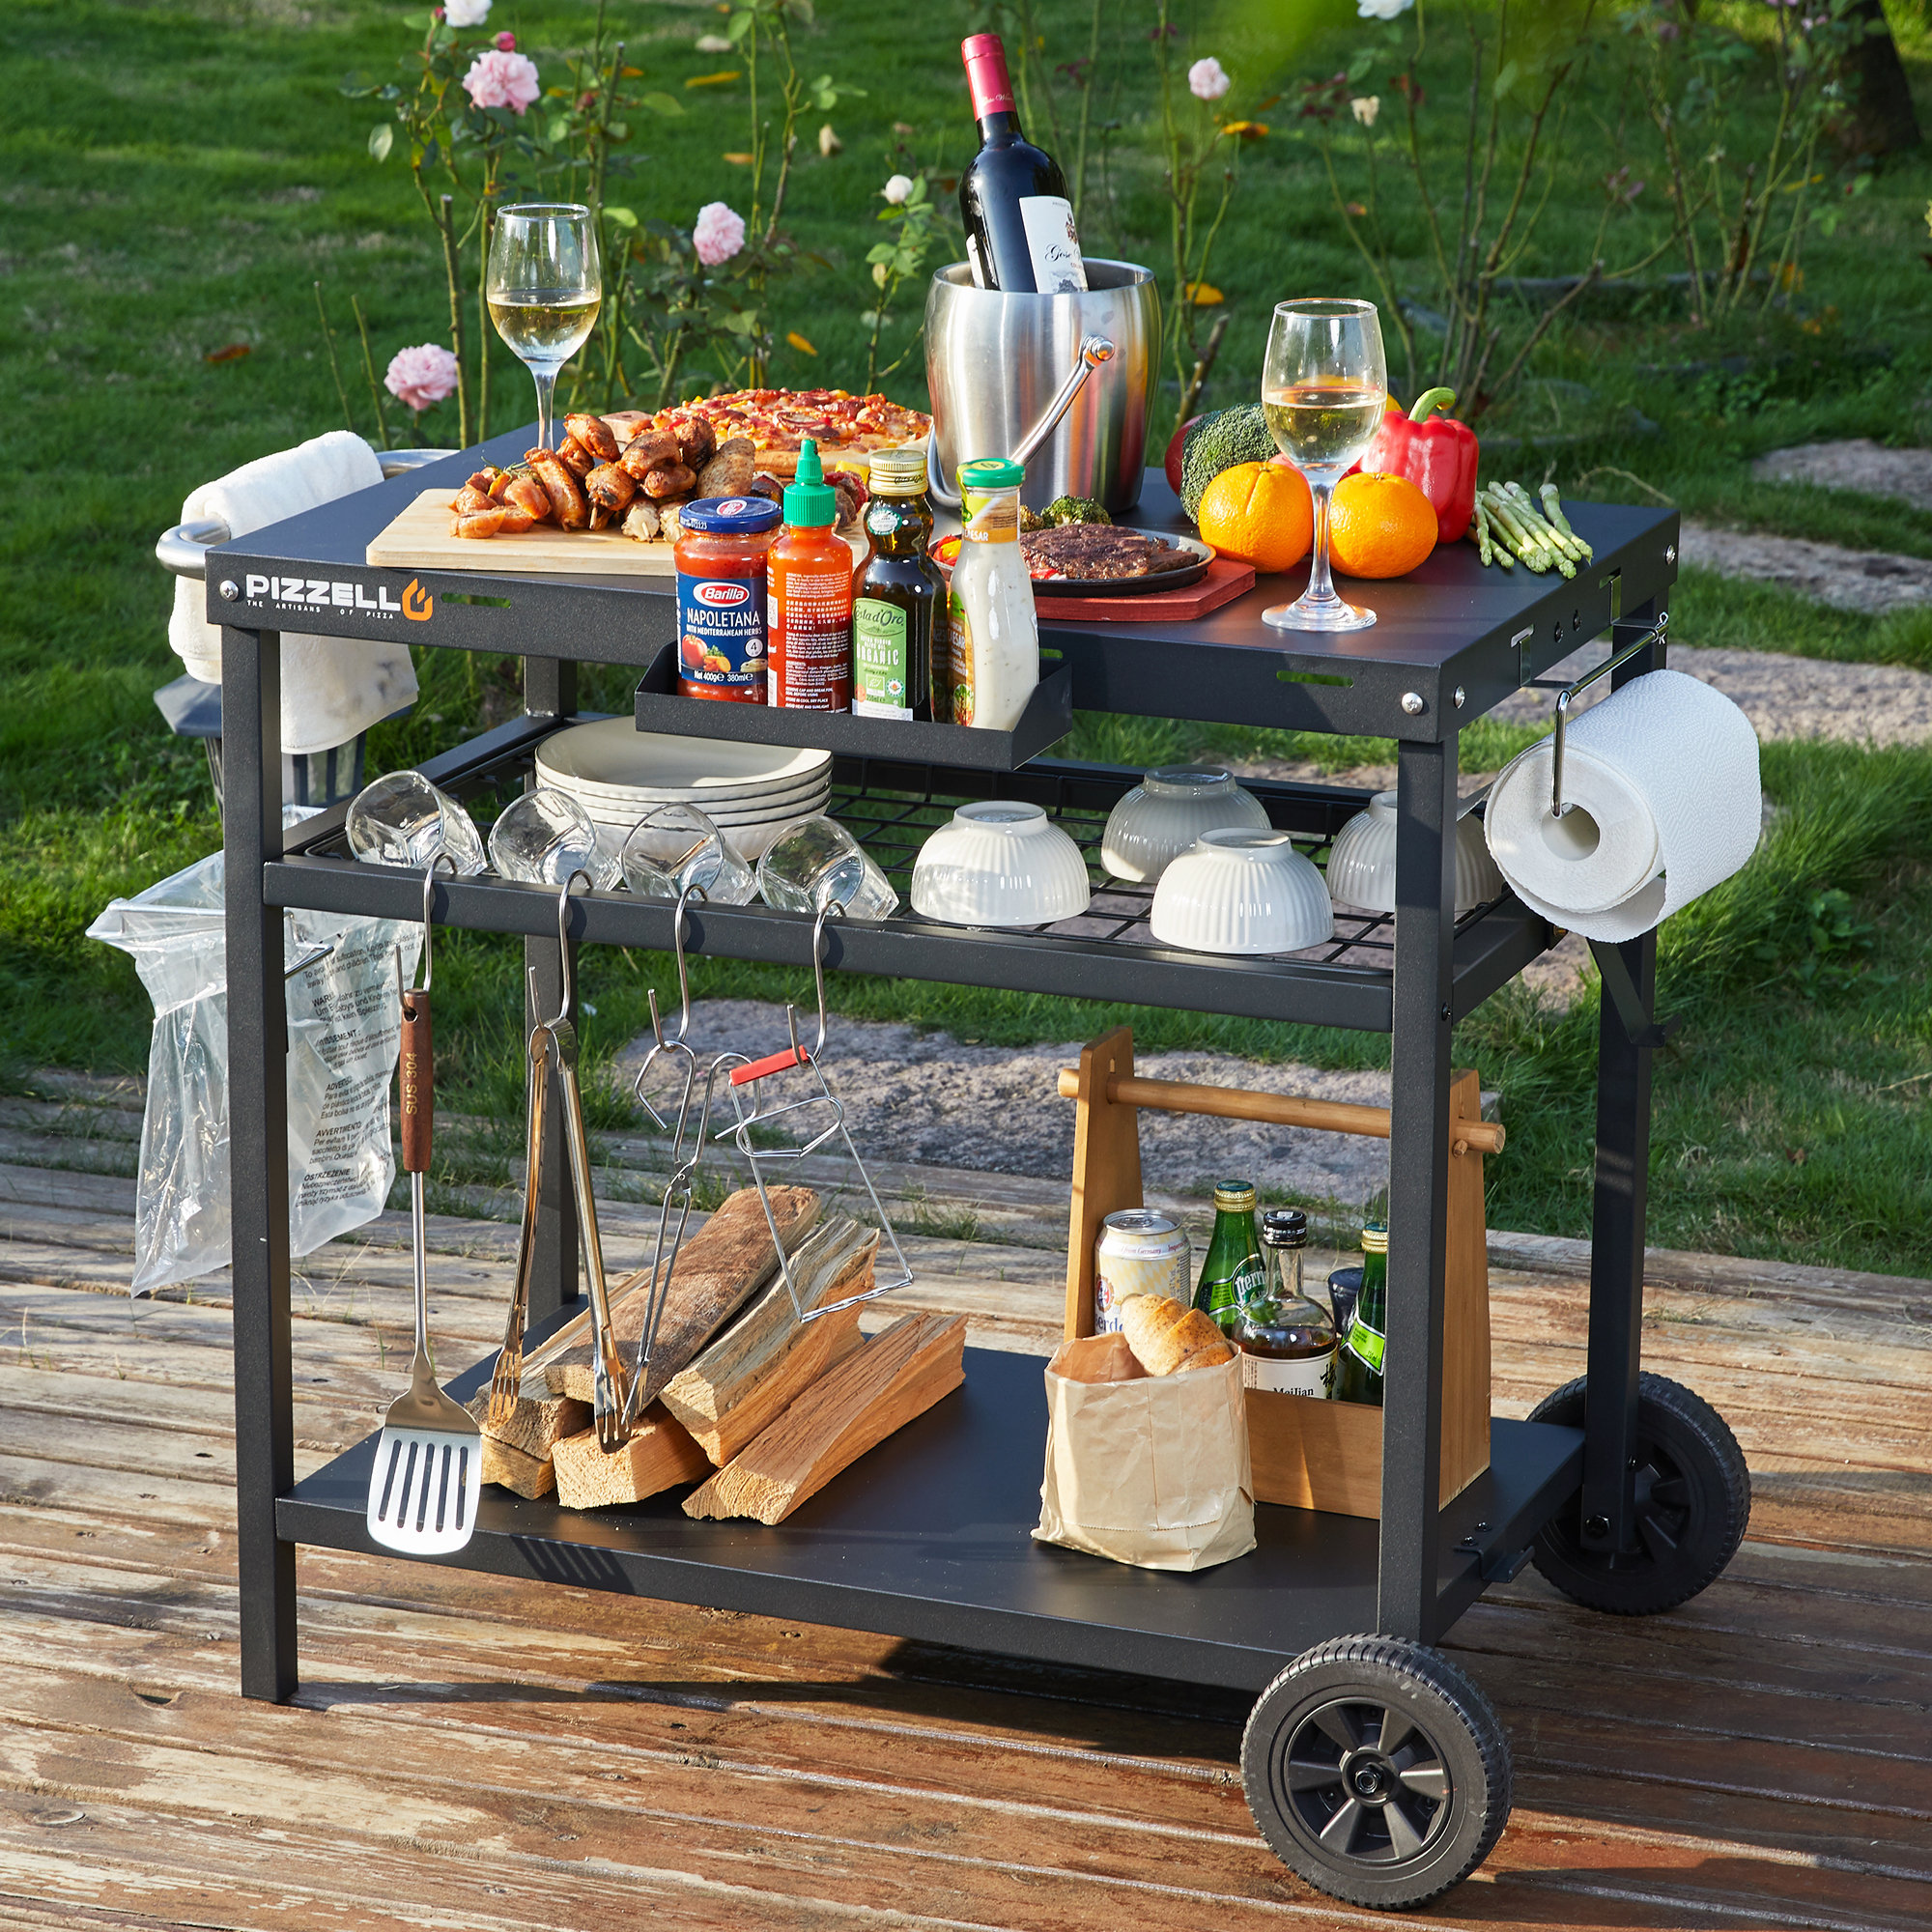 New Pizza Oven Table Grill Cart, Large Grill Table for Ninja Grill